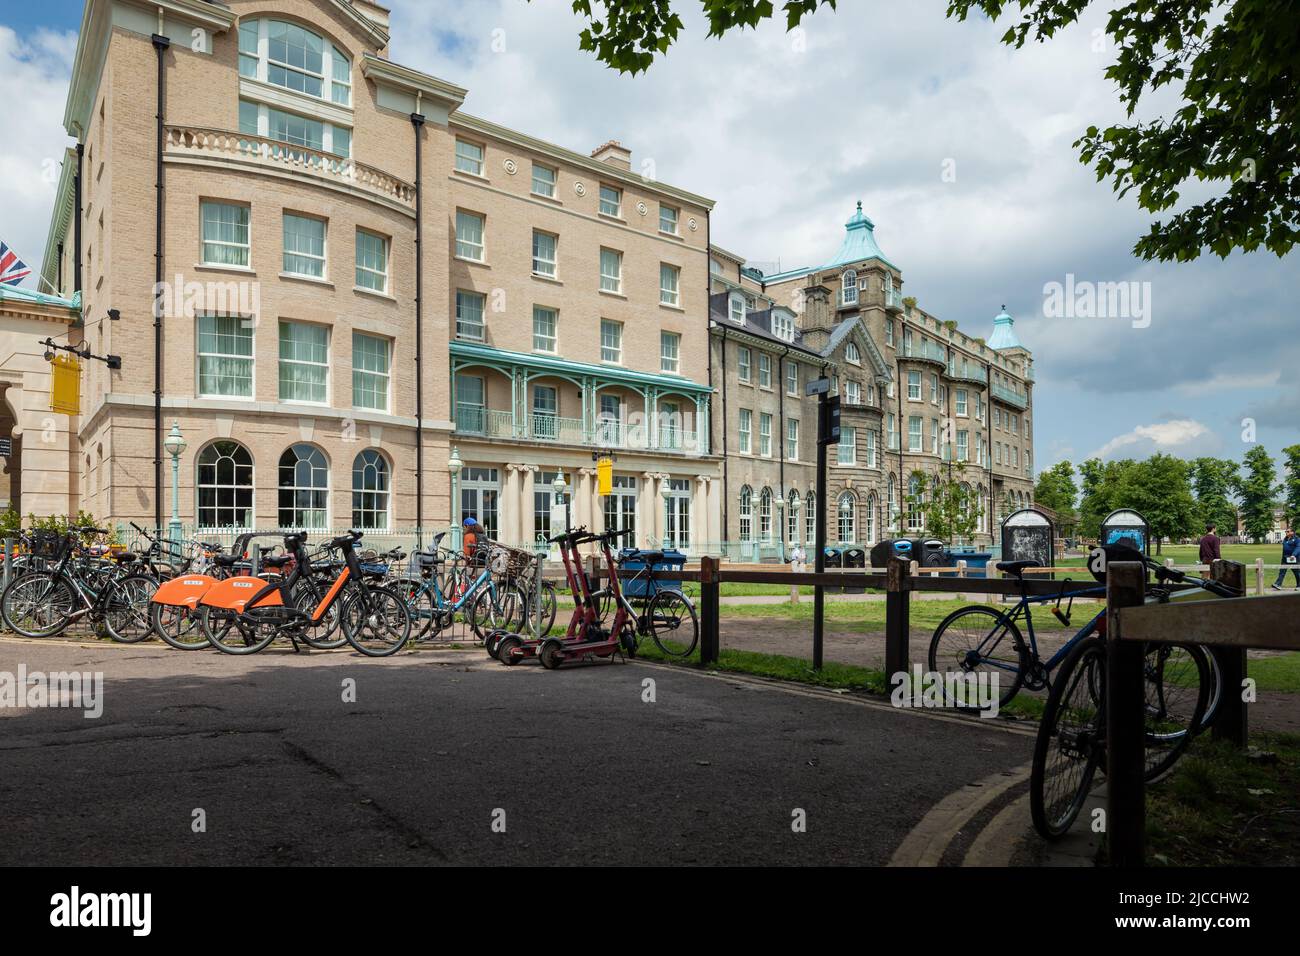 Spring afternoon at University Arms Hotel in Cambridge, England. Stock Photo